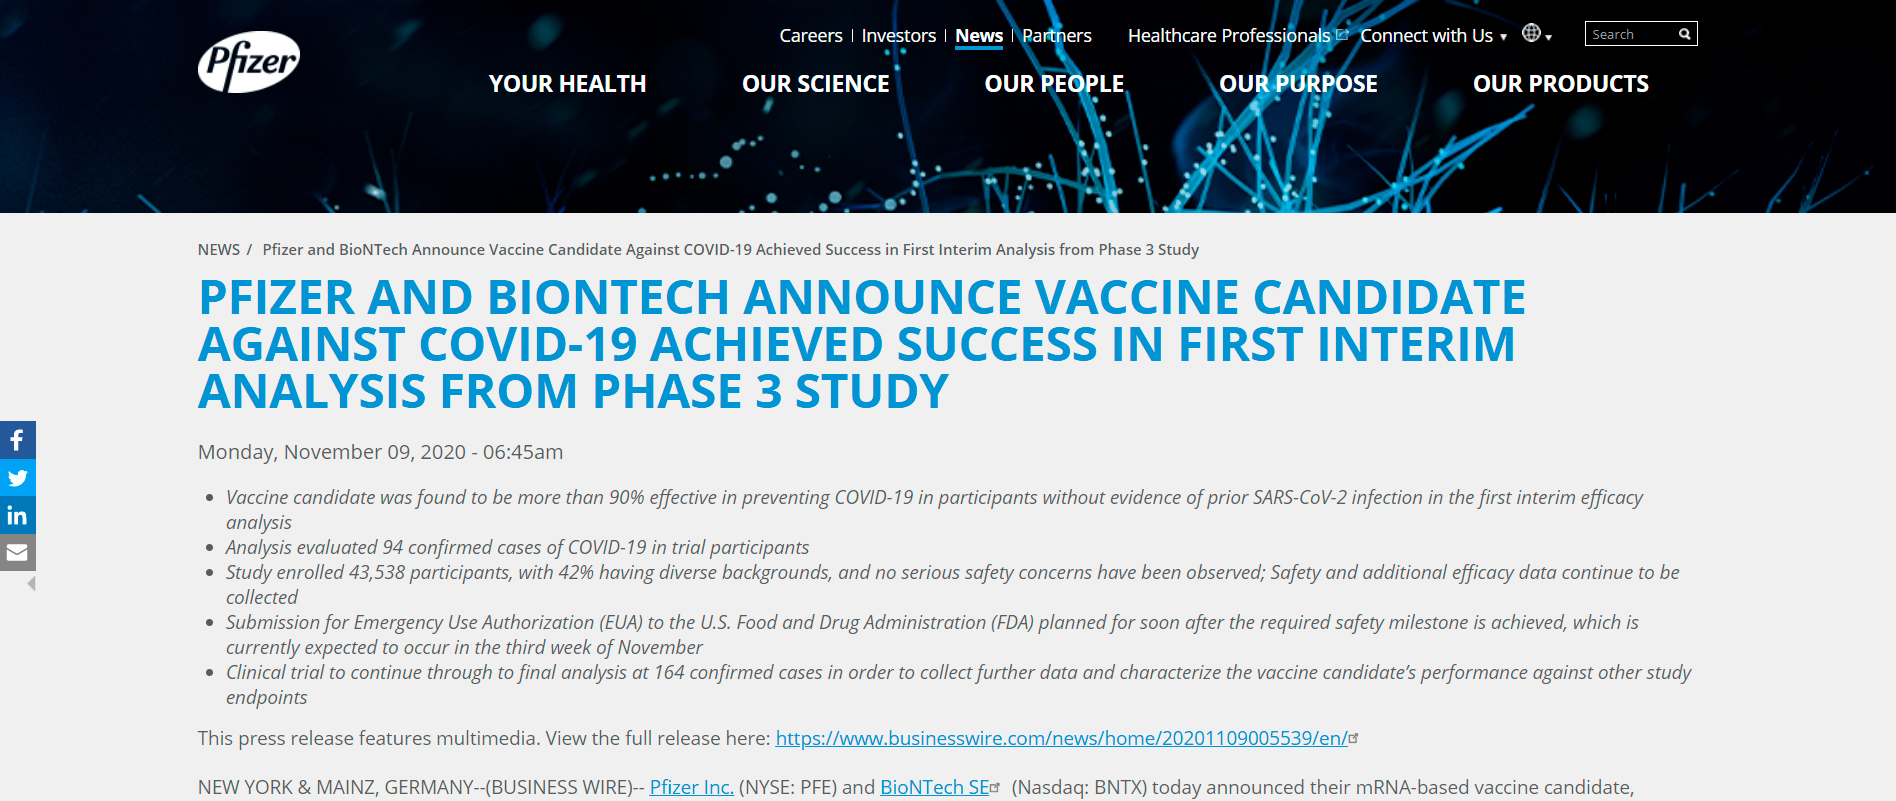 Источник: https://www.pfizer.com/news/press-release/press-release-detail/pfizer-and-biontech-announce-vaccine-candidate-against